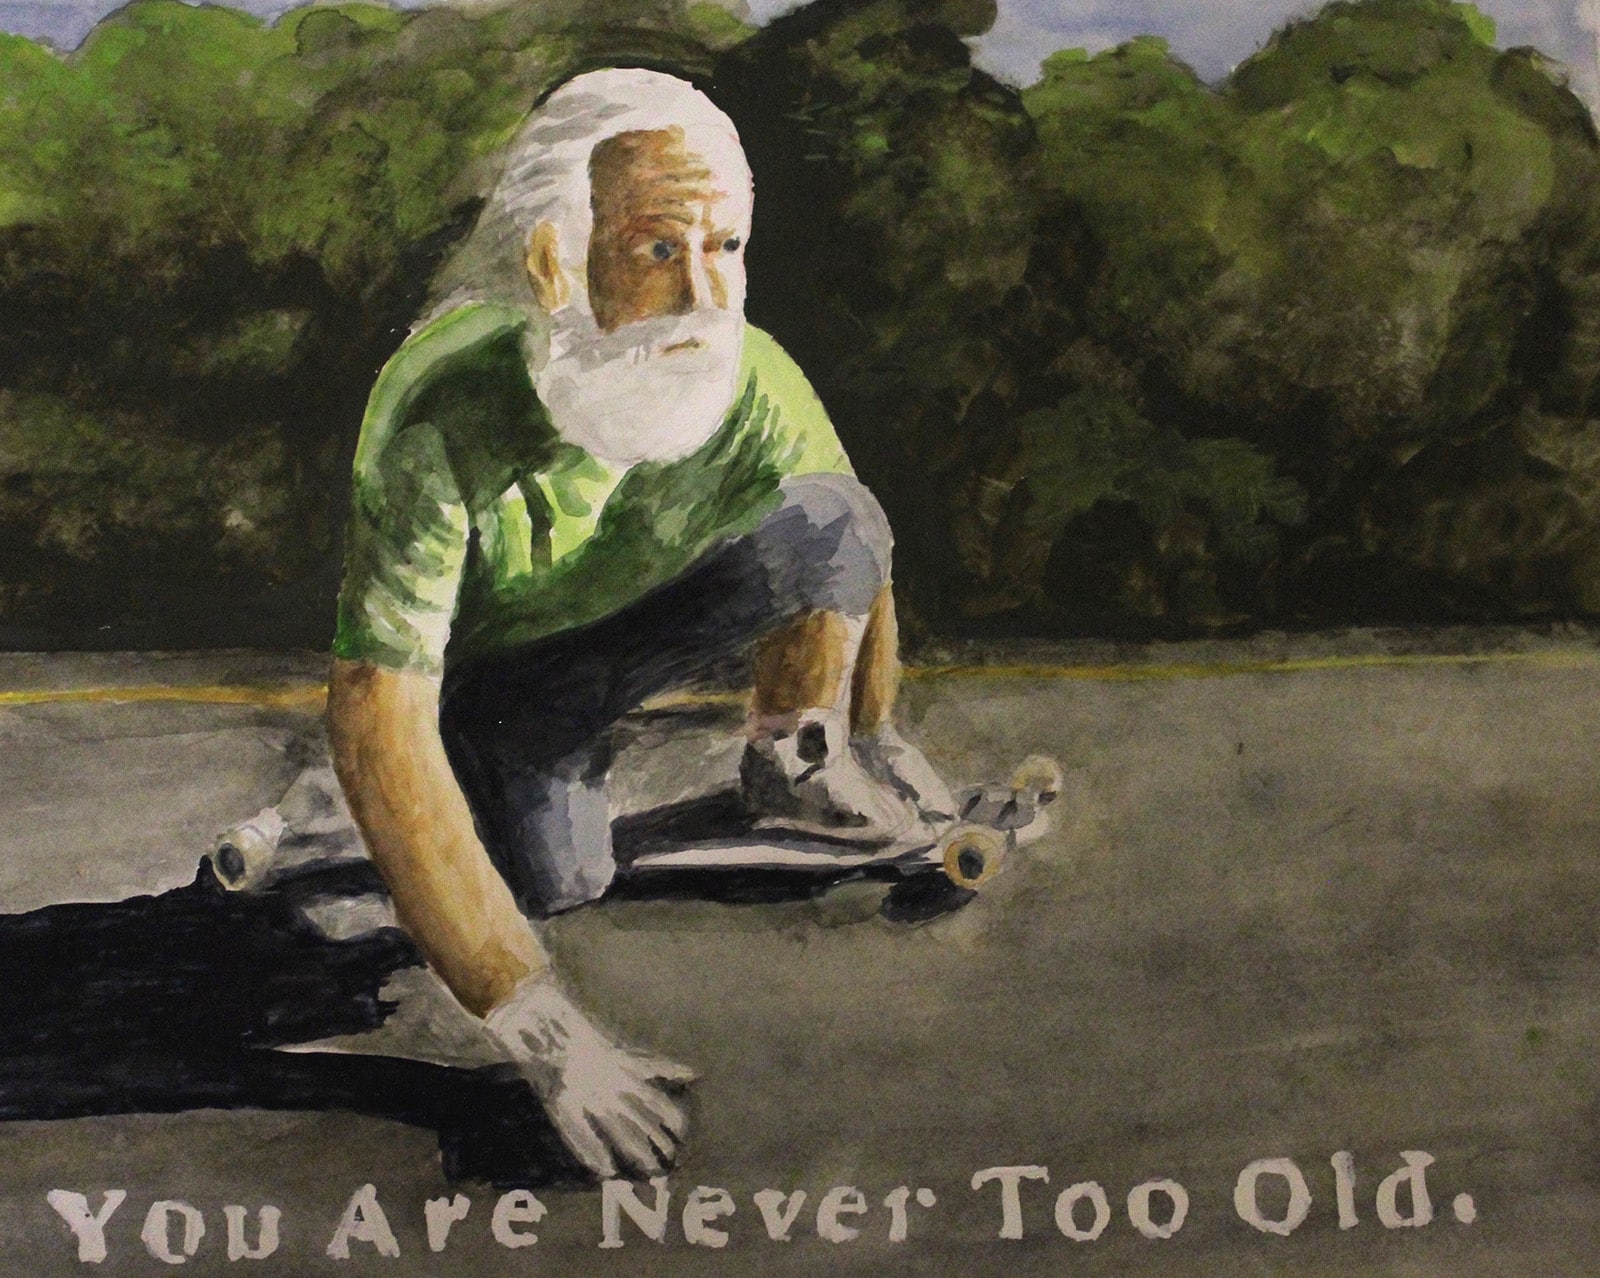 "You Are Never Too Old" 2016, Watercolor, 24"x14" by John Nieman